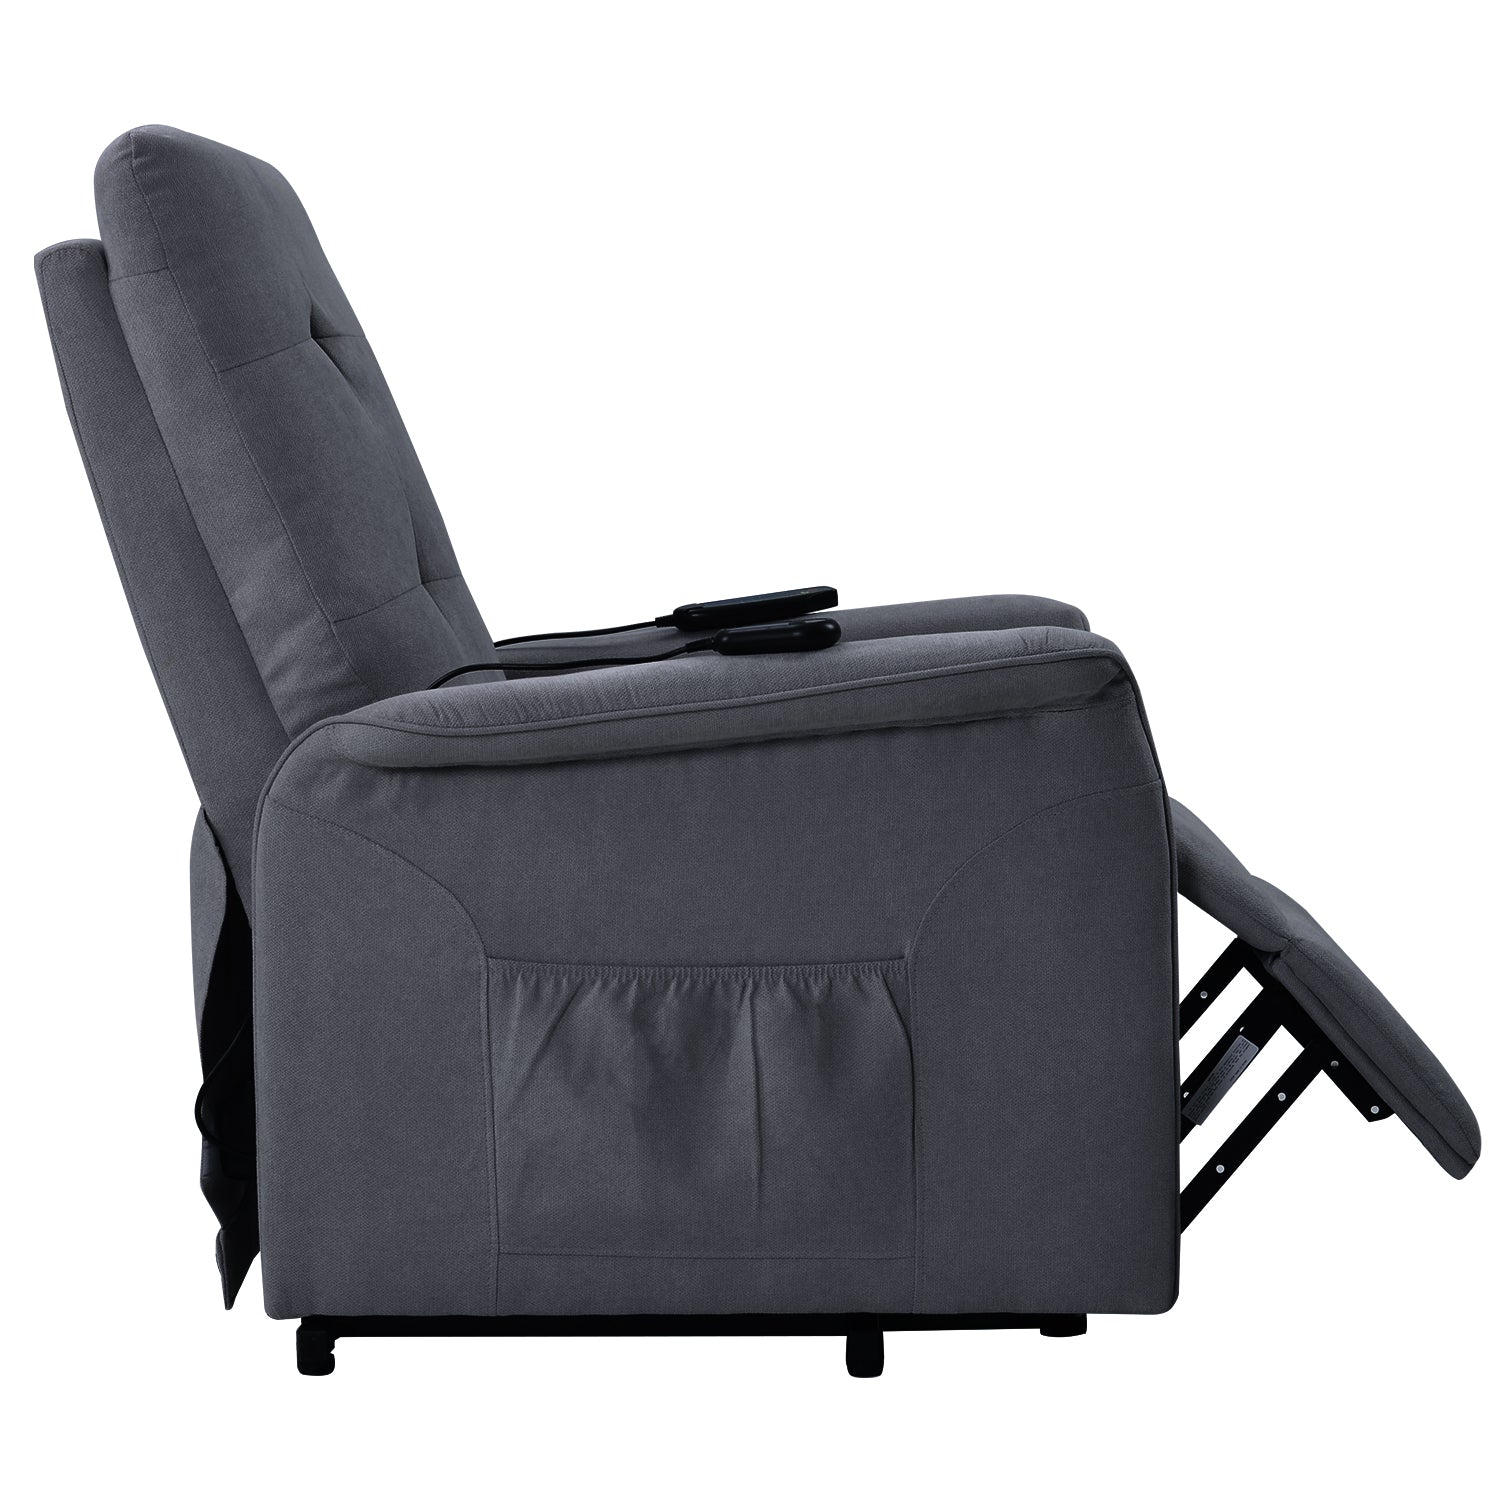 Adjustable Power Lift Recliner Chair for Elderly By: Alabama Beds